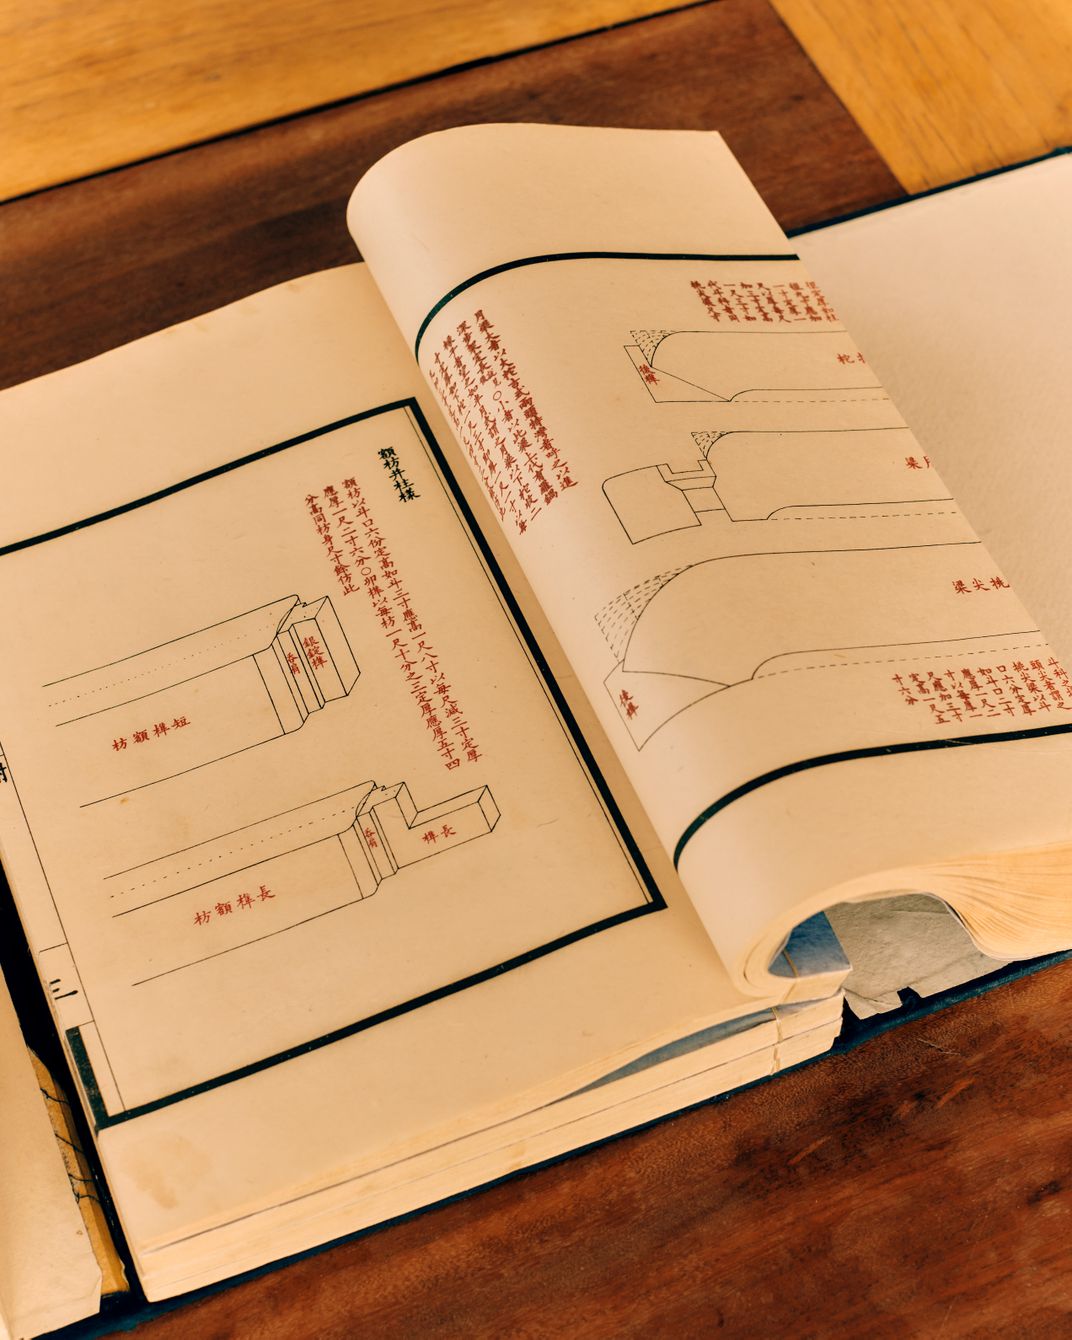 An antique copy of a manual known as The Way to Build, originally composed more than 1,000 years ago. The book lays out in detail how to construct a building such as Ai’s studio. “It’s like an encyclopedia,” Ai says. “China’s culture used to be so complet